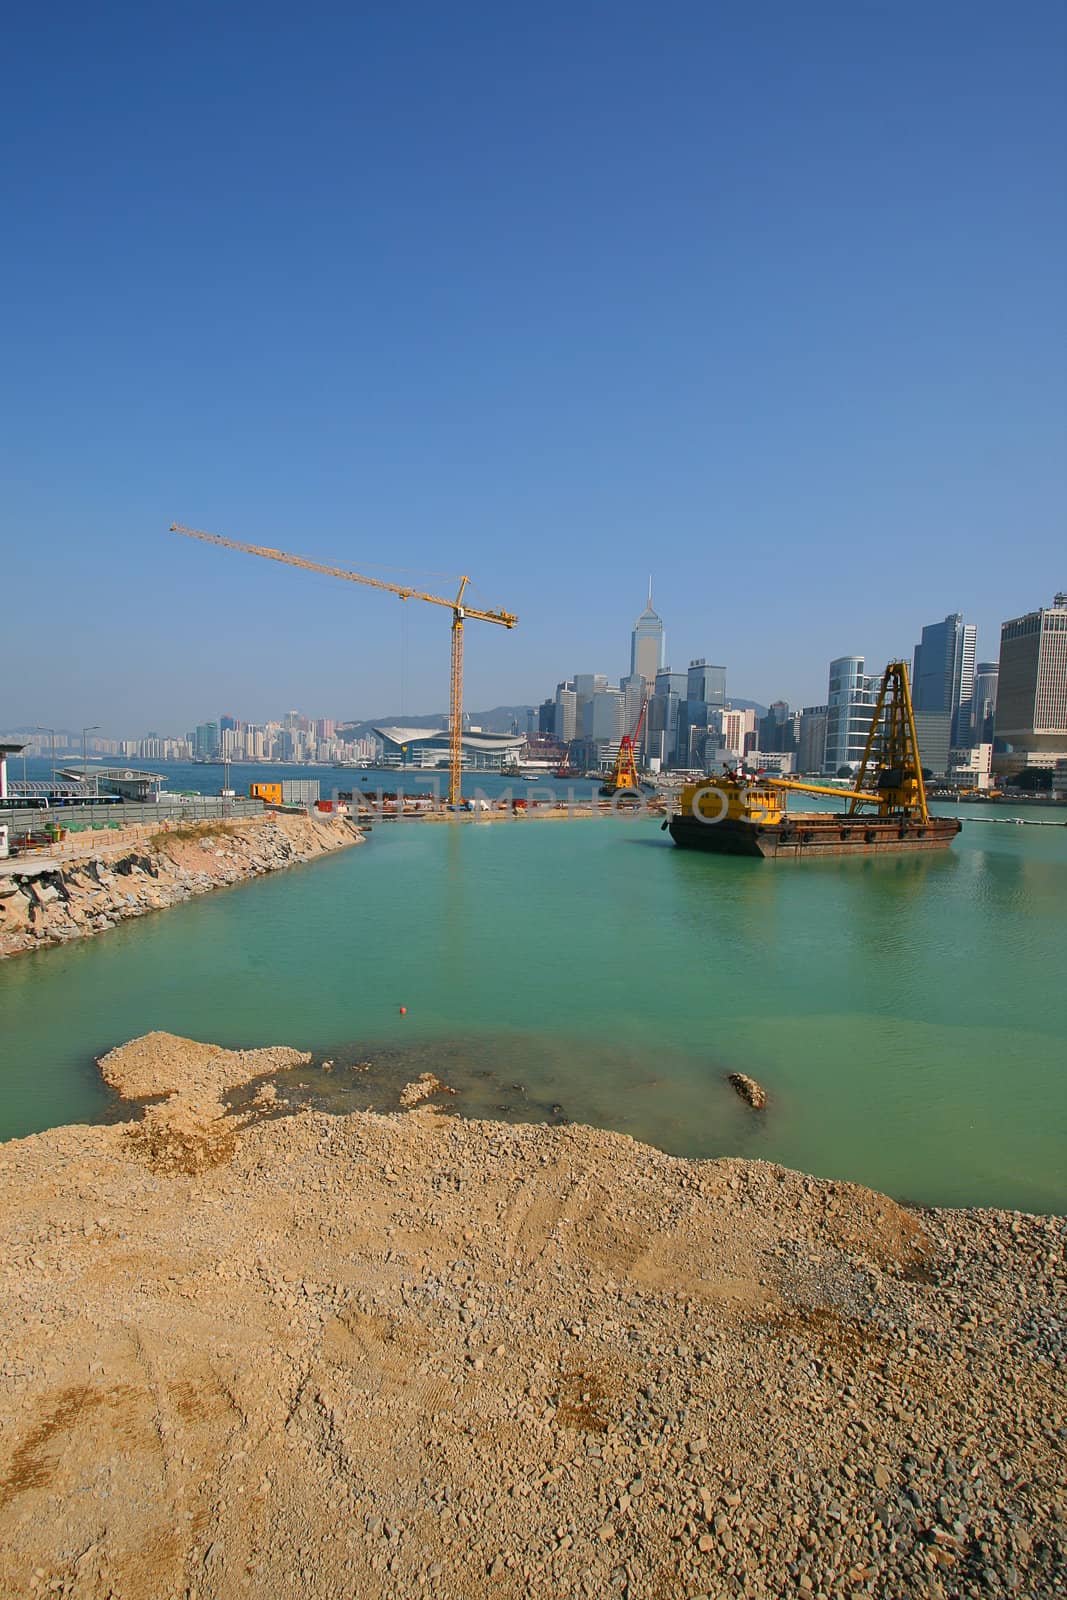 Construction underway of the new Hong Kong waterfront, that will change the Hong Kong Island skyline for ever. March 2008 Photo.